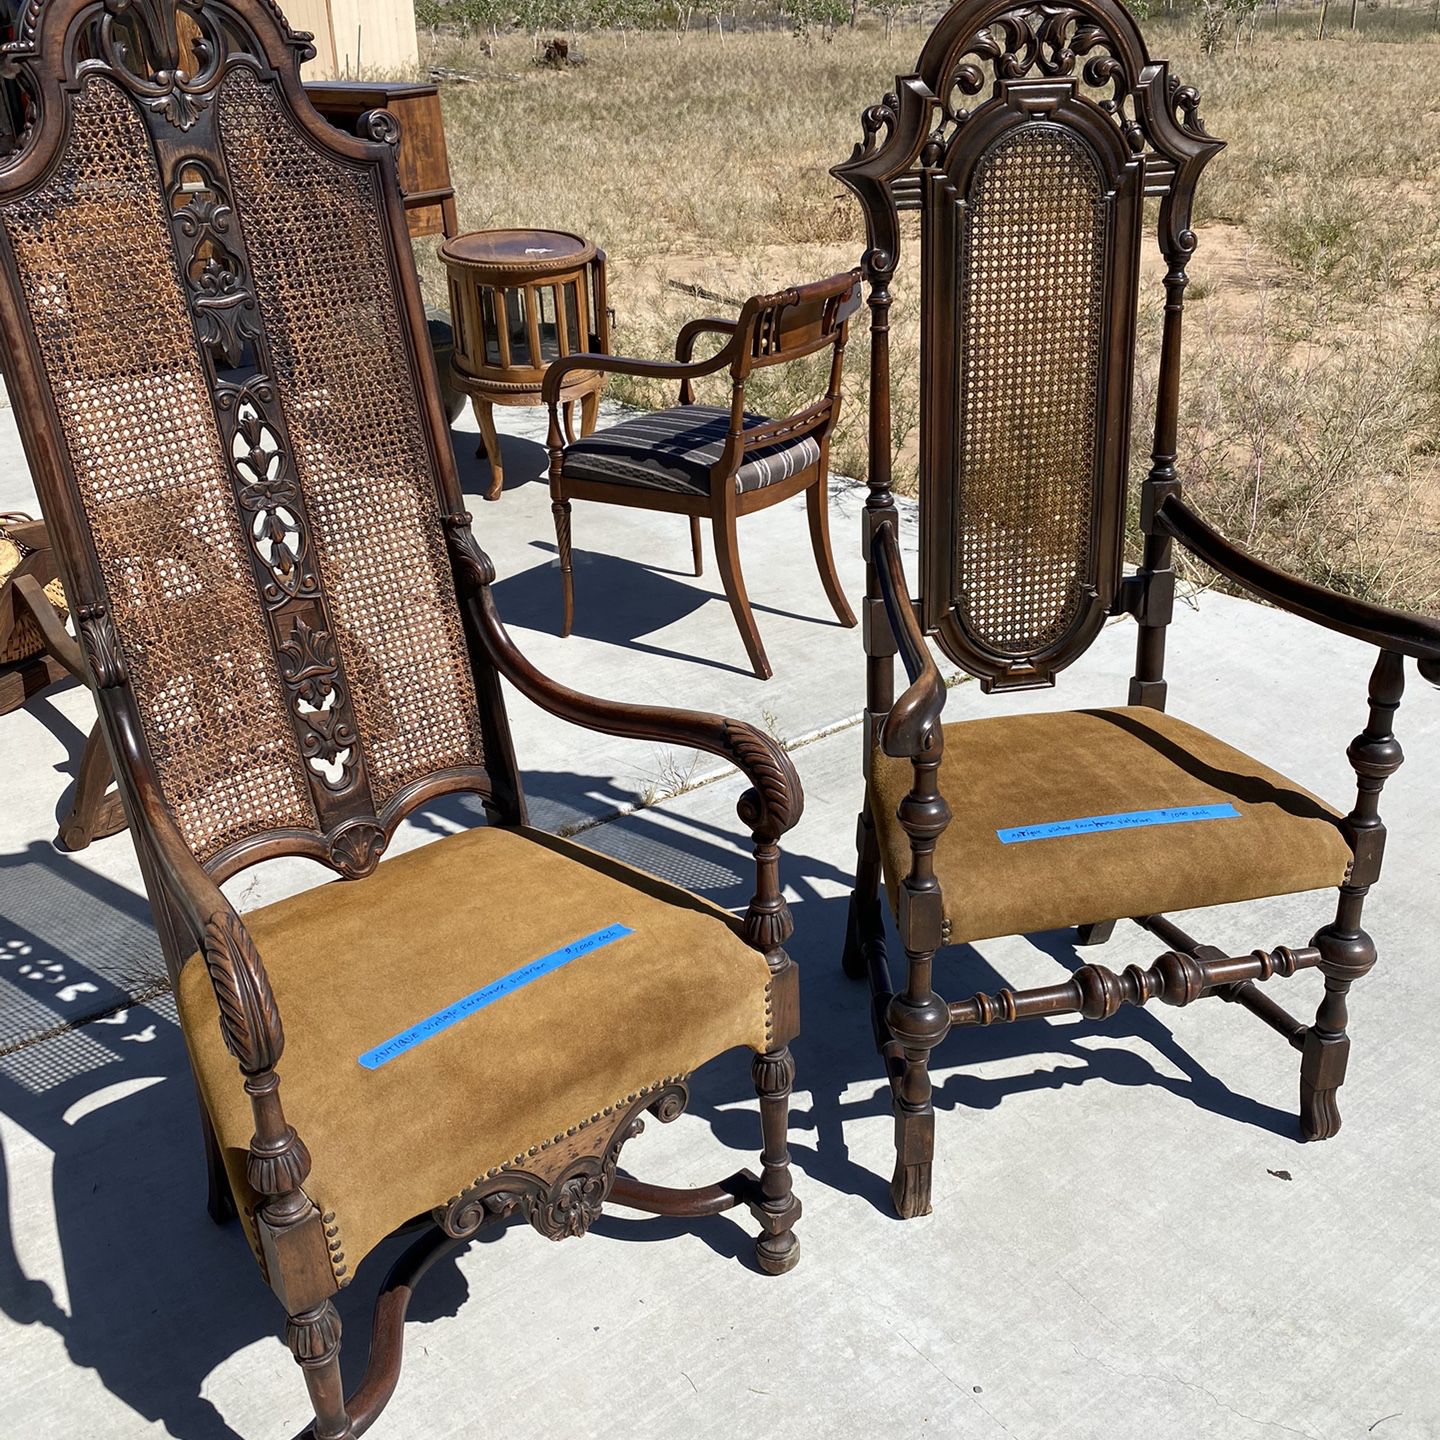 Victorian High back Chairs Values At $5000 Each Sell $1000 Each 